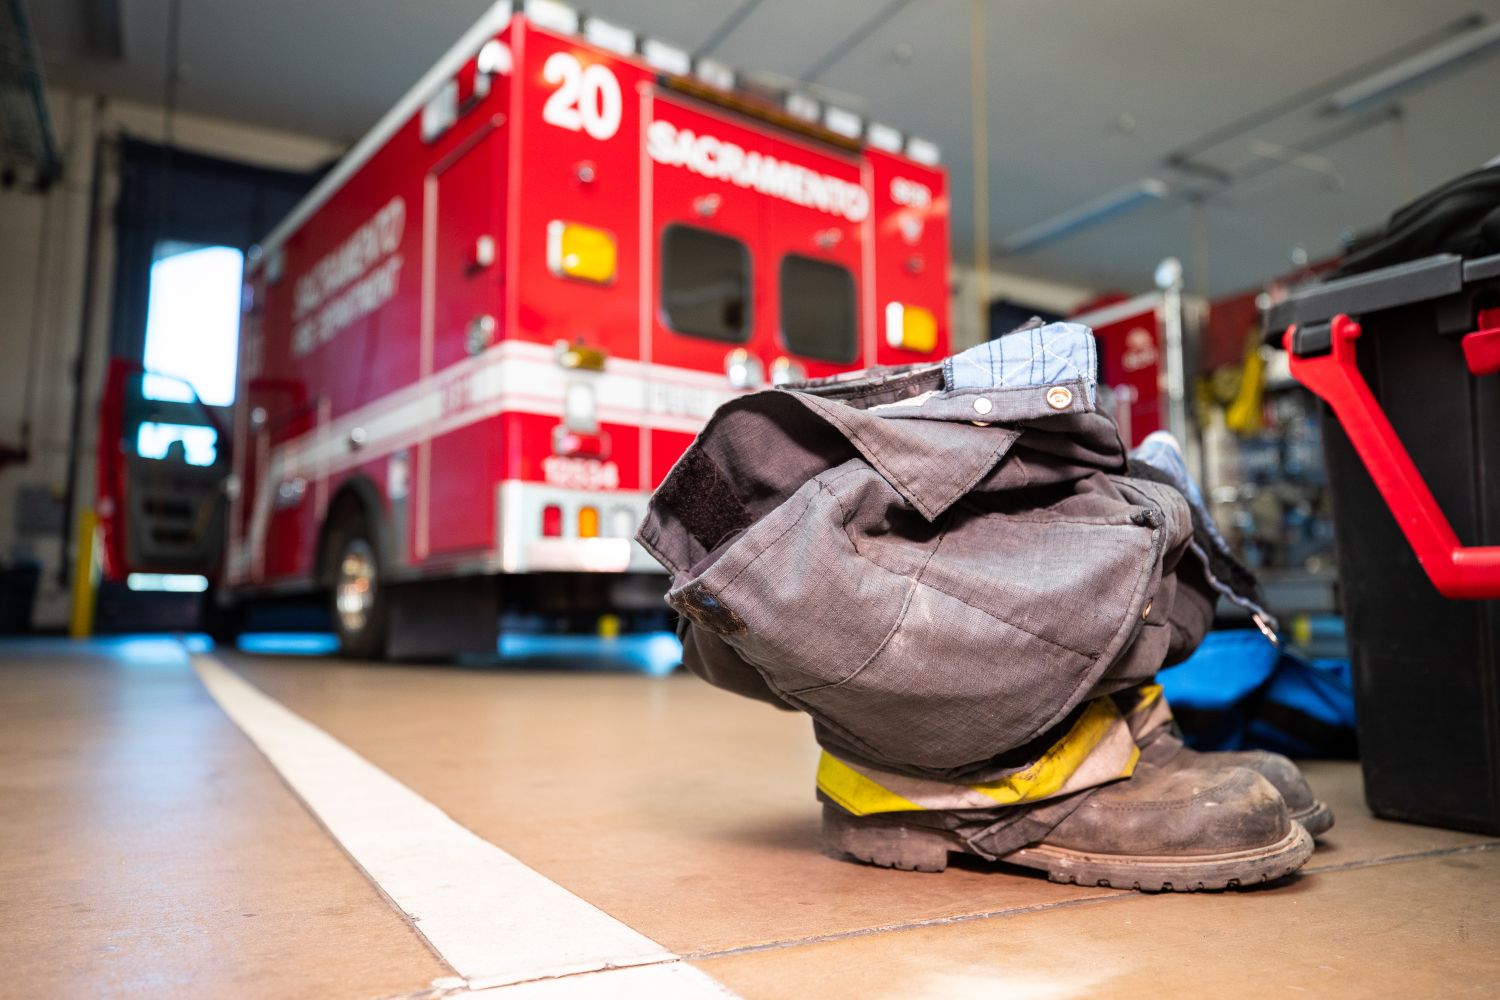 a pair of boots on the floor with an ambulance in the background.